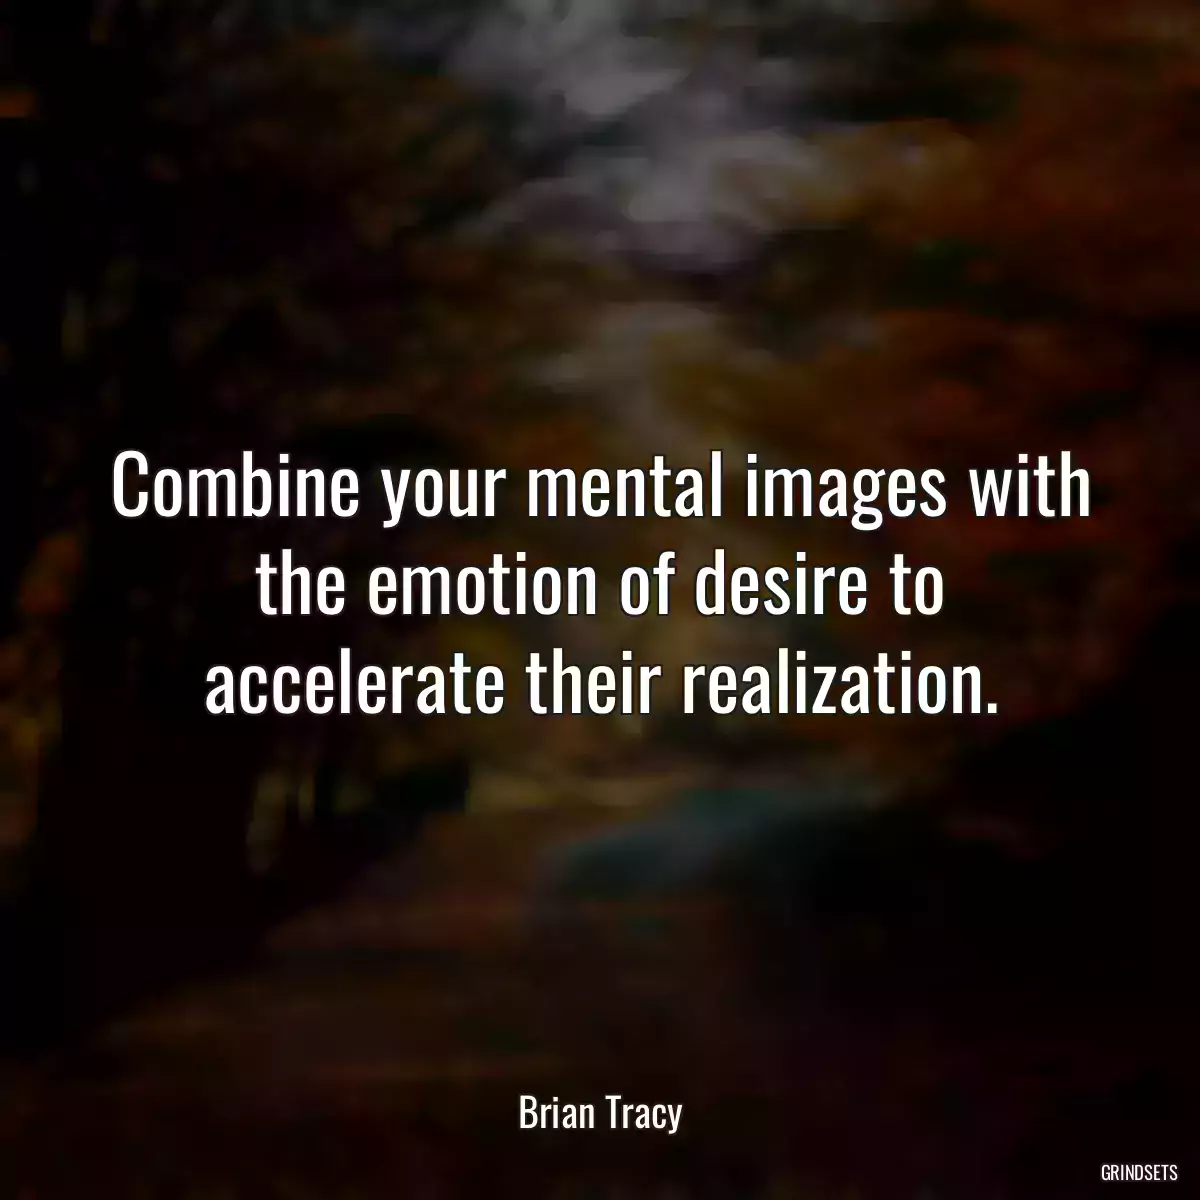 Combine your mental images with the emotion of desire to accelerate their realization.